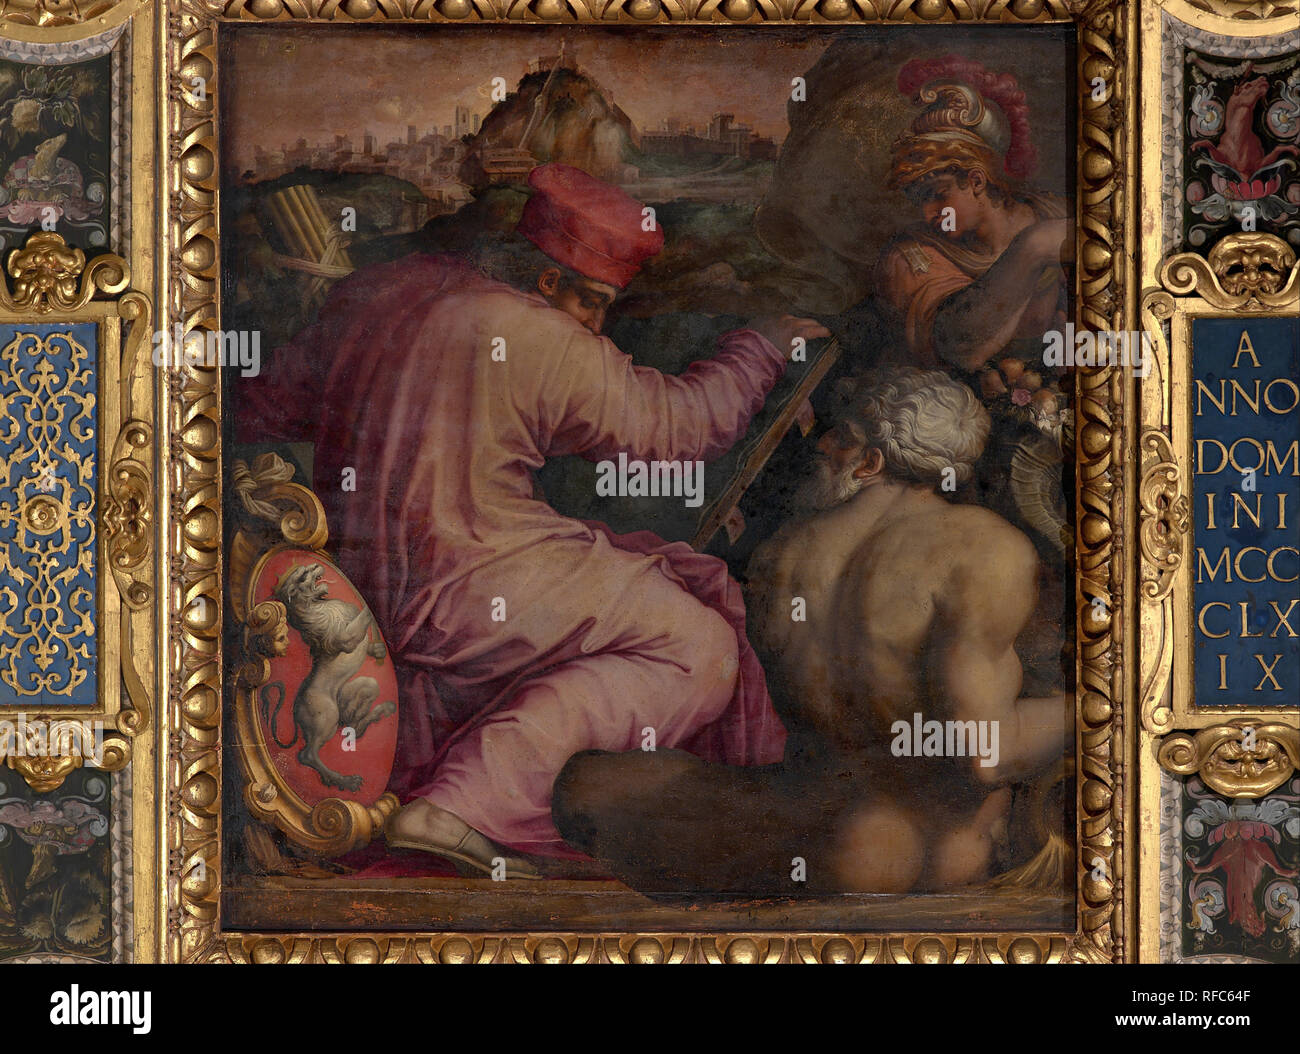 Allegory of San Miniato in lower Valdarno. Date/Period: 1563 - 1565. Oil painting on wood. Height: 250 mm (9.84 in); Width: 250 mm (9.84 in). Author: Giorgio Vasari. VASARI, GIORGIO. Stock Photo